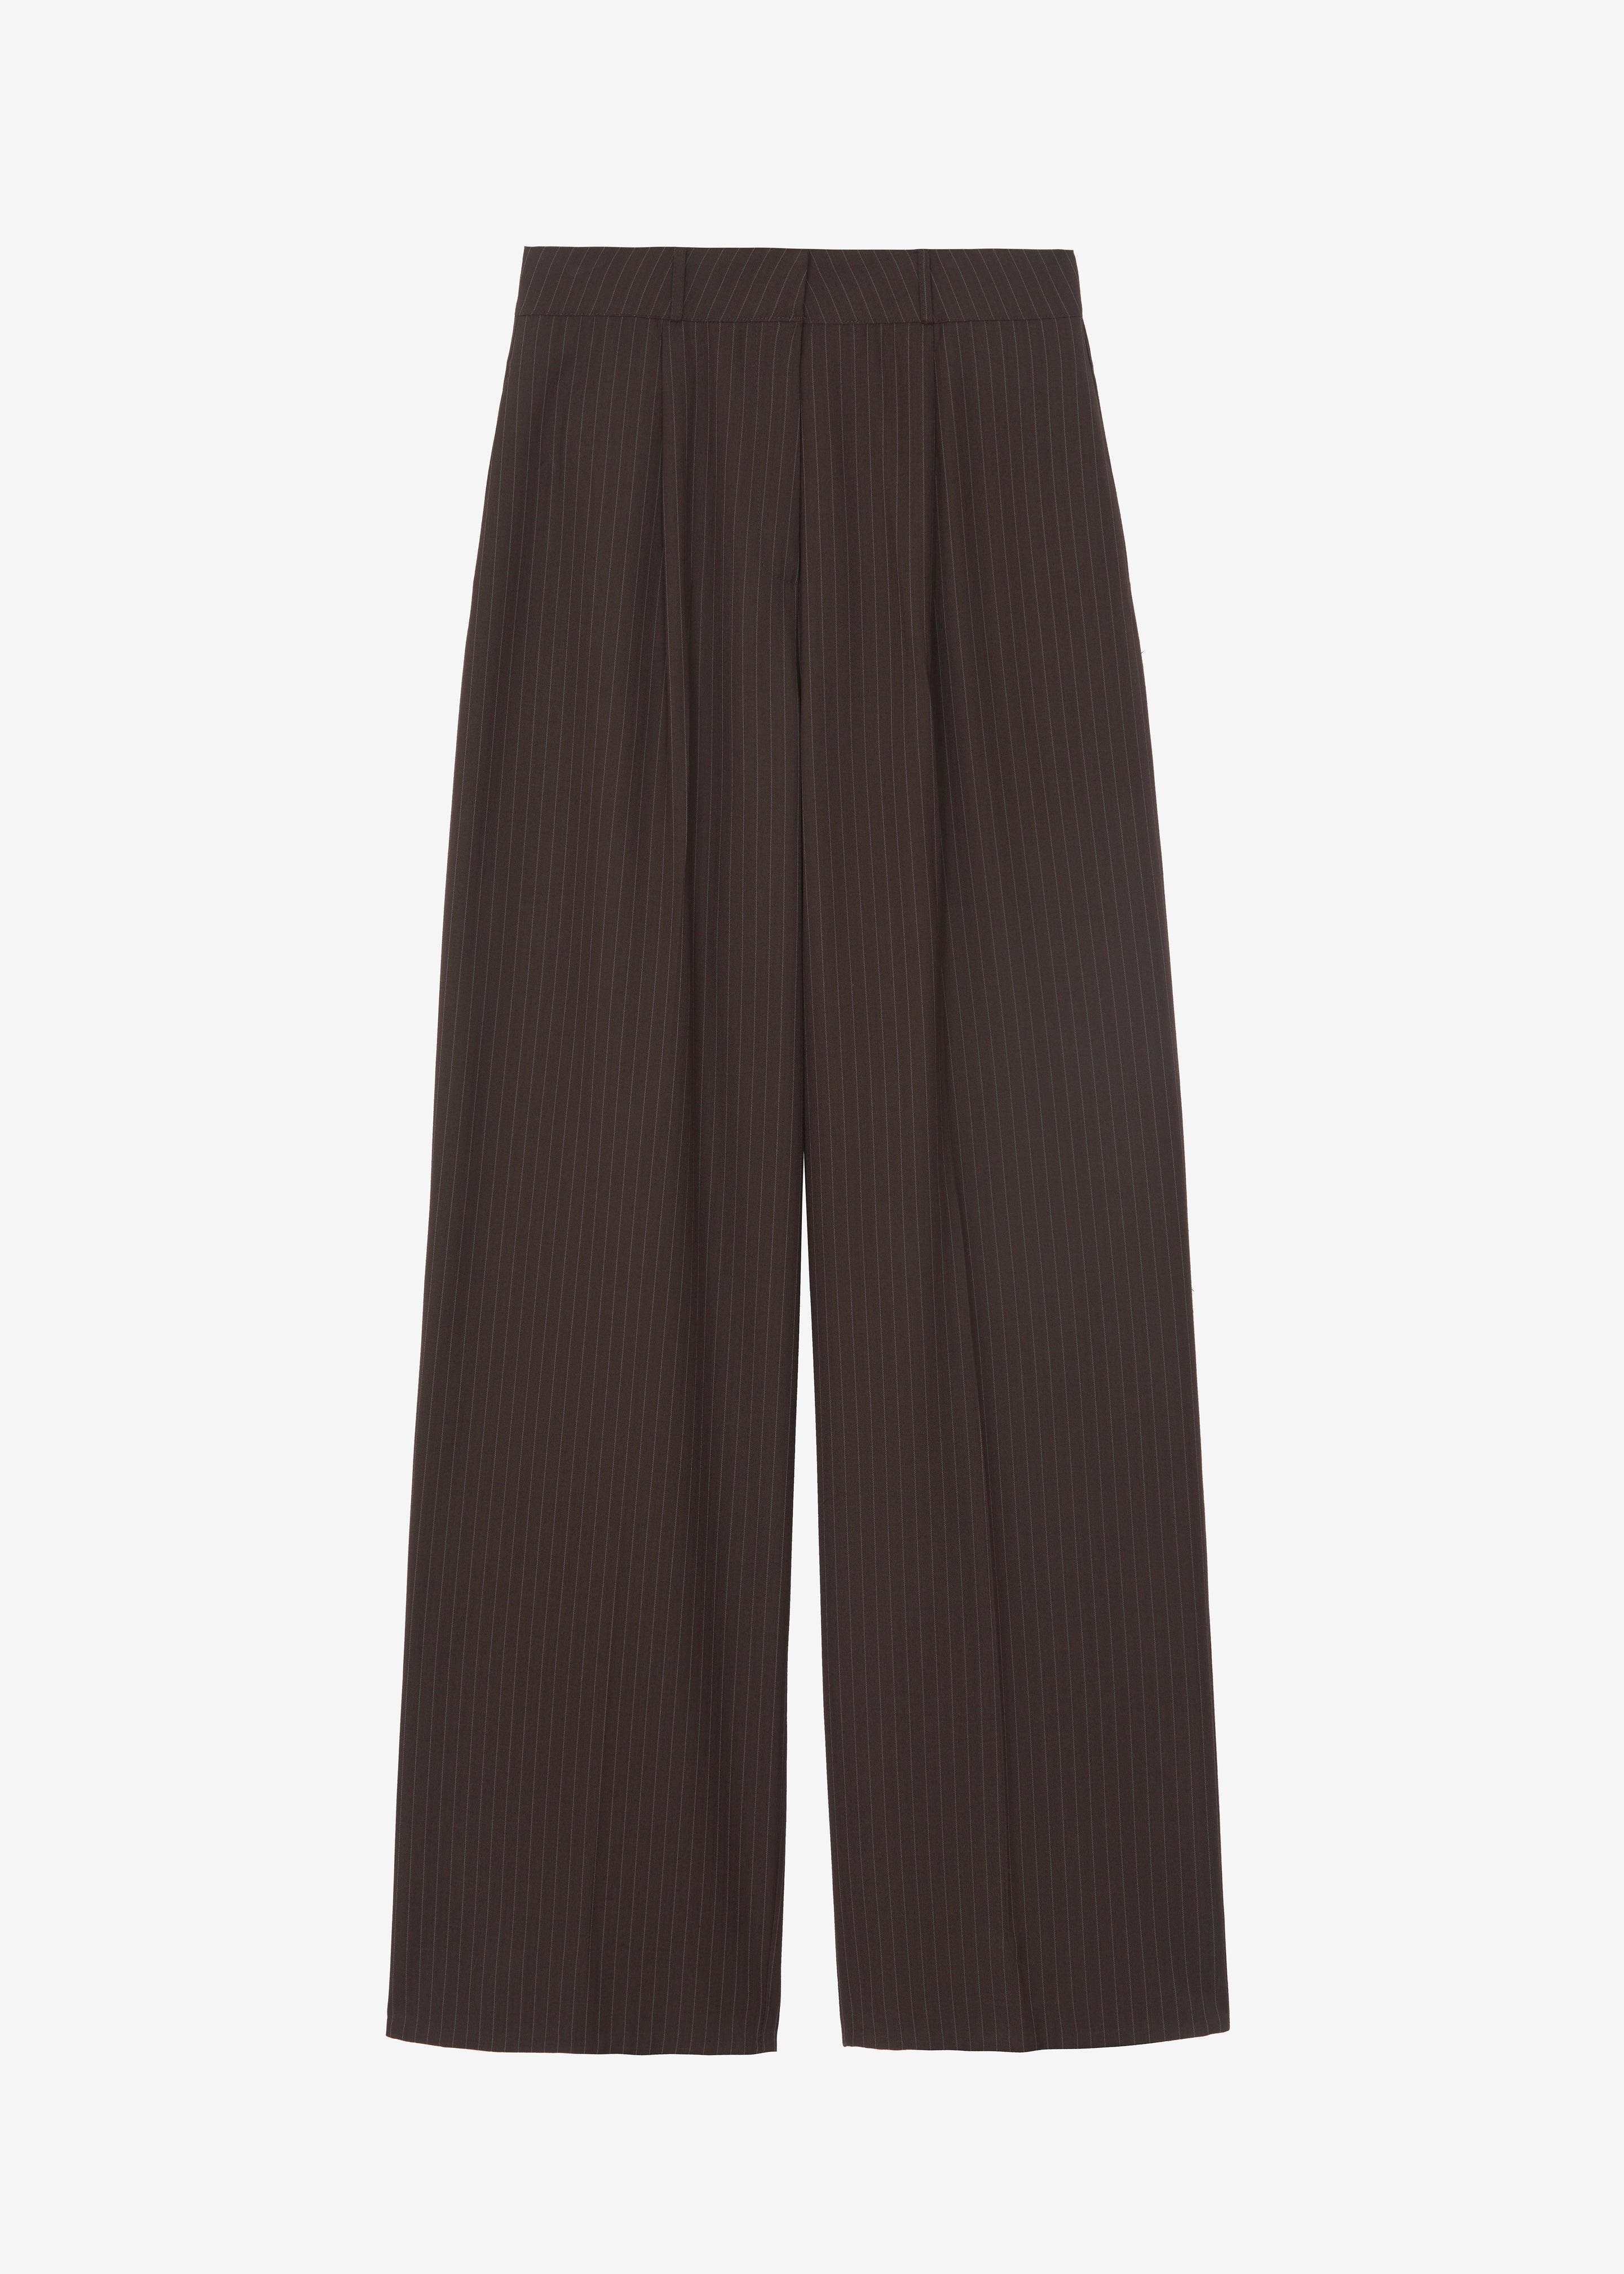 Ivey Pintuck Trousers - Brown/White Pinstripe - 16